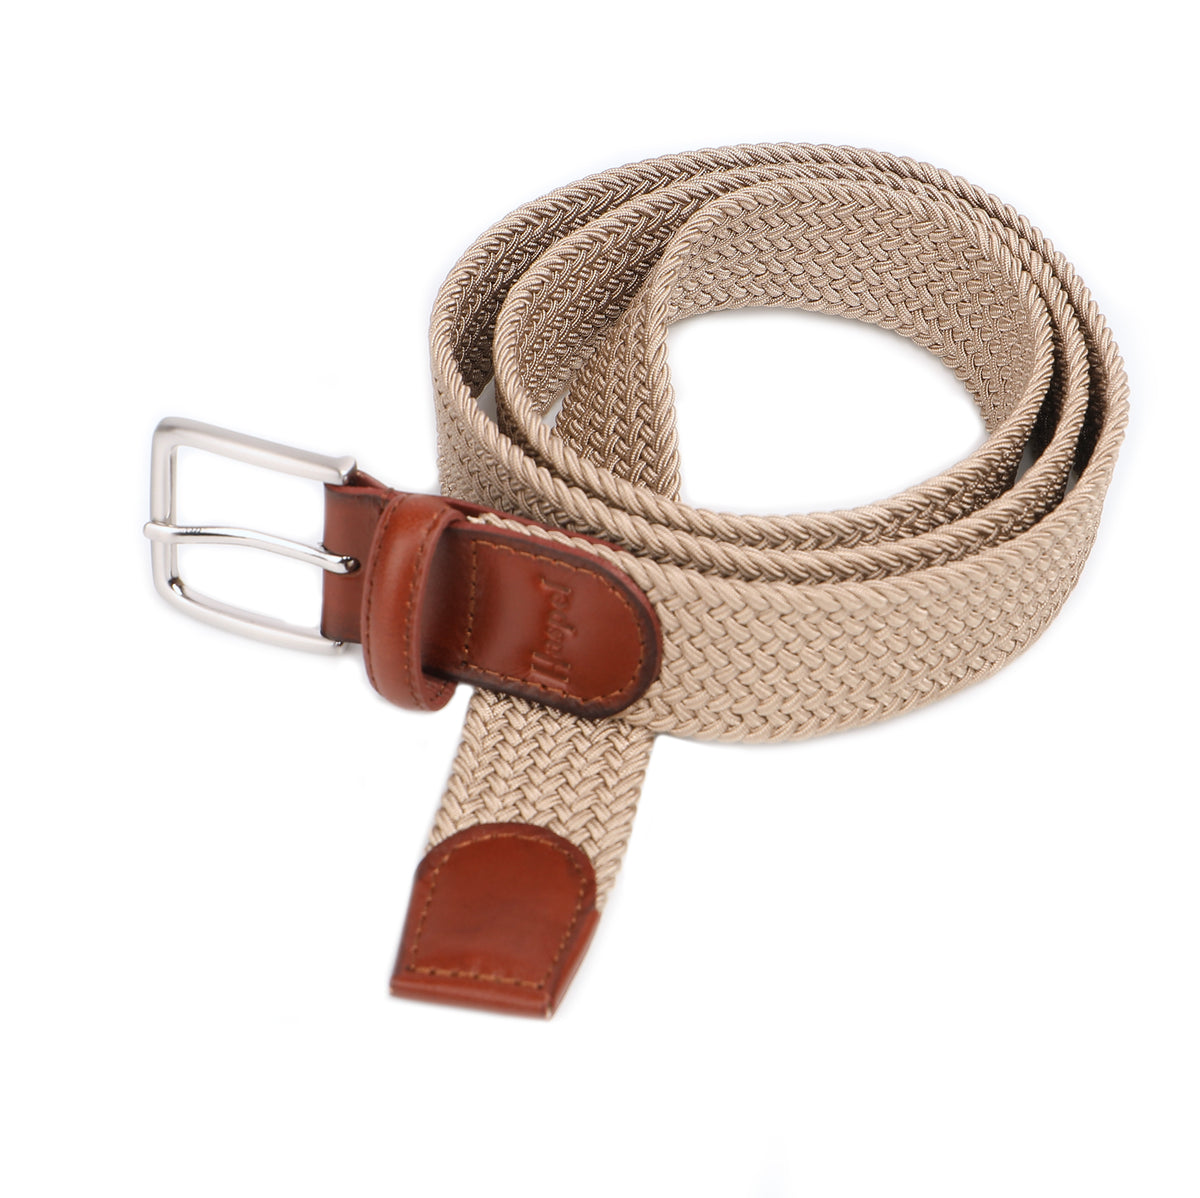 Our braided belts are woven to add a rich style to any look. Featuring leather end tabs, a solid nickel buckle with antique finish, and color choices in both solid and mult-colored of braided elastic.  Alpha Sizing • Braided elastic • Leather End Tabs • 1-1/4&quot; Wide • Solid Nickel Buckle, Antique Finish • Imported 